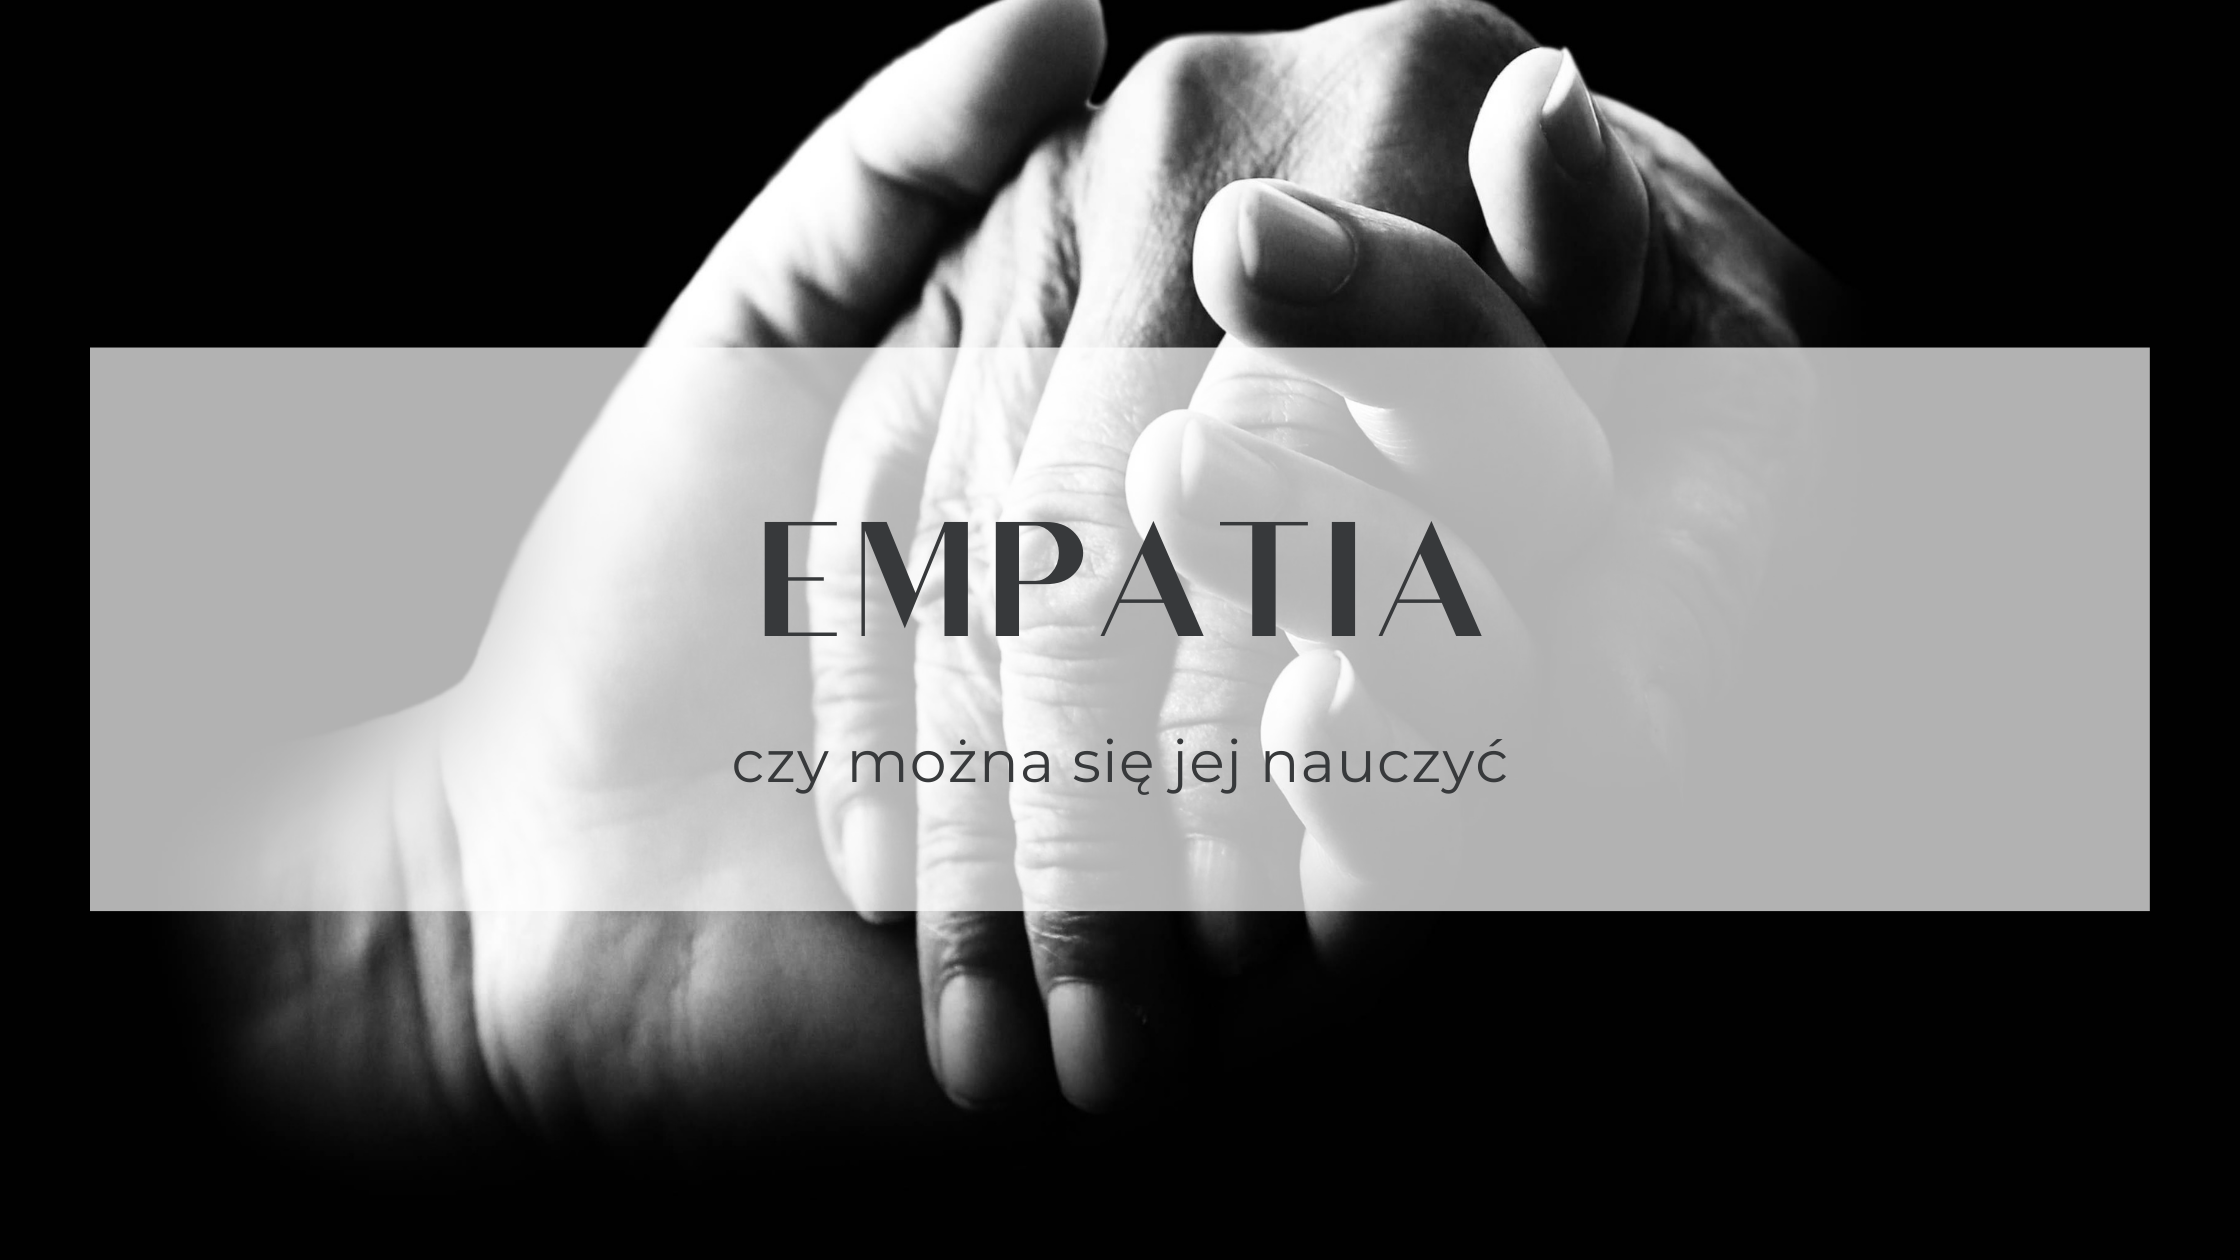 You are currently viewing Empatia